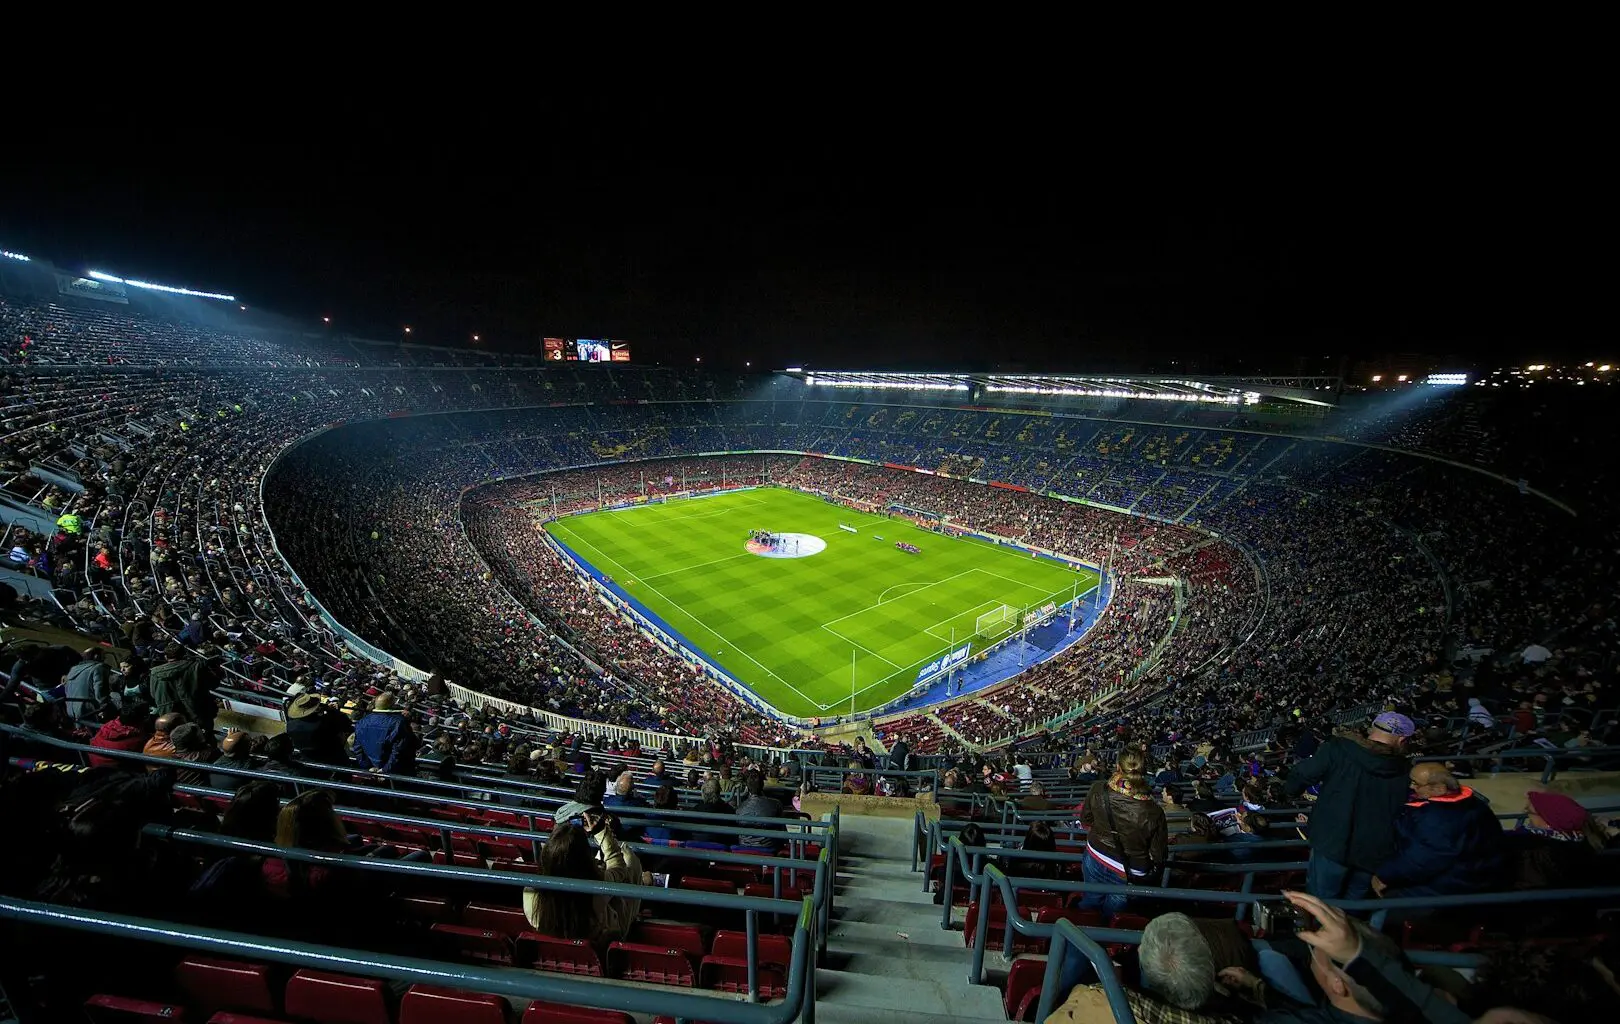 A football stadium filled with people watching a game, FC Barcelona.